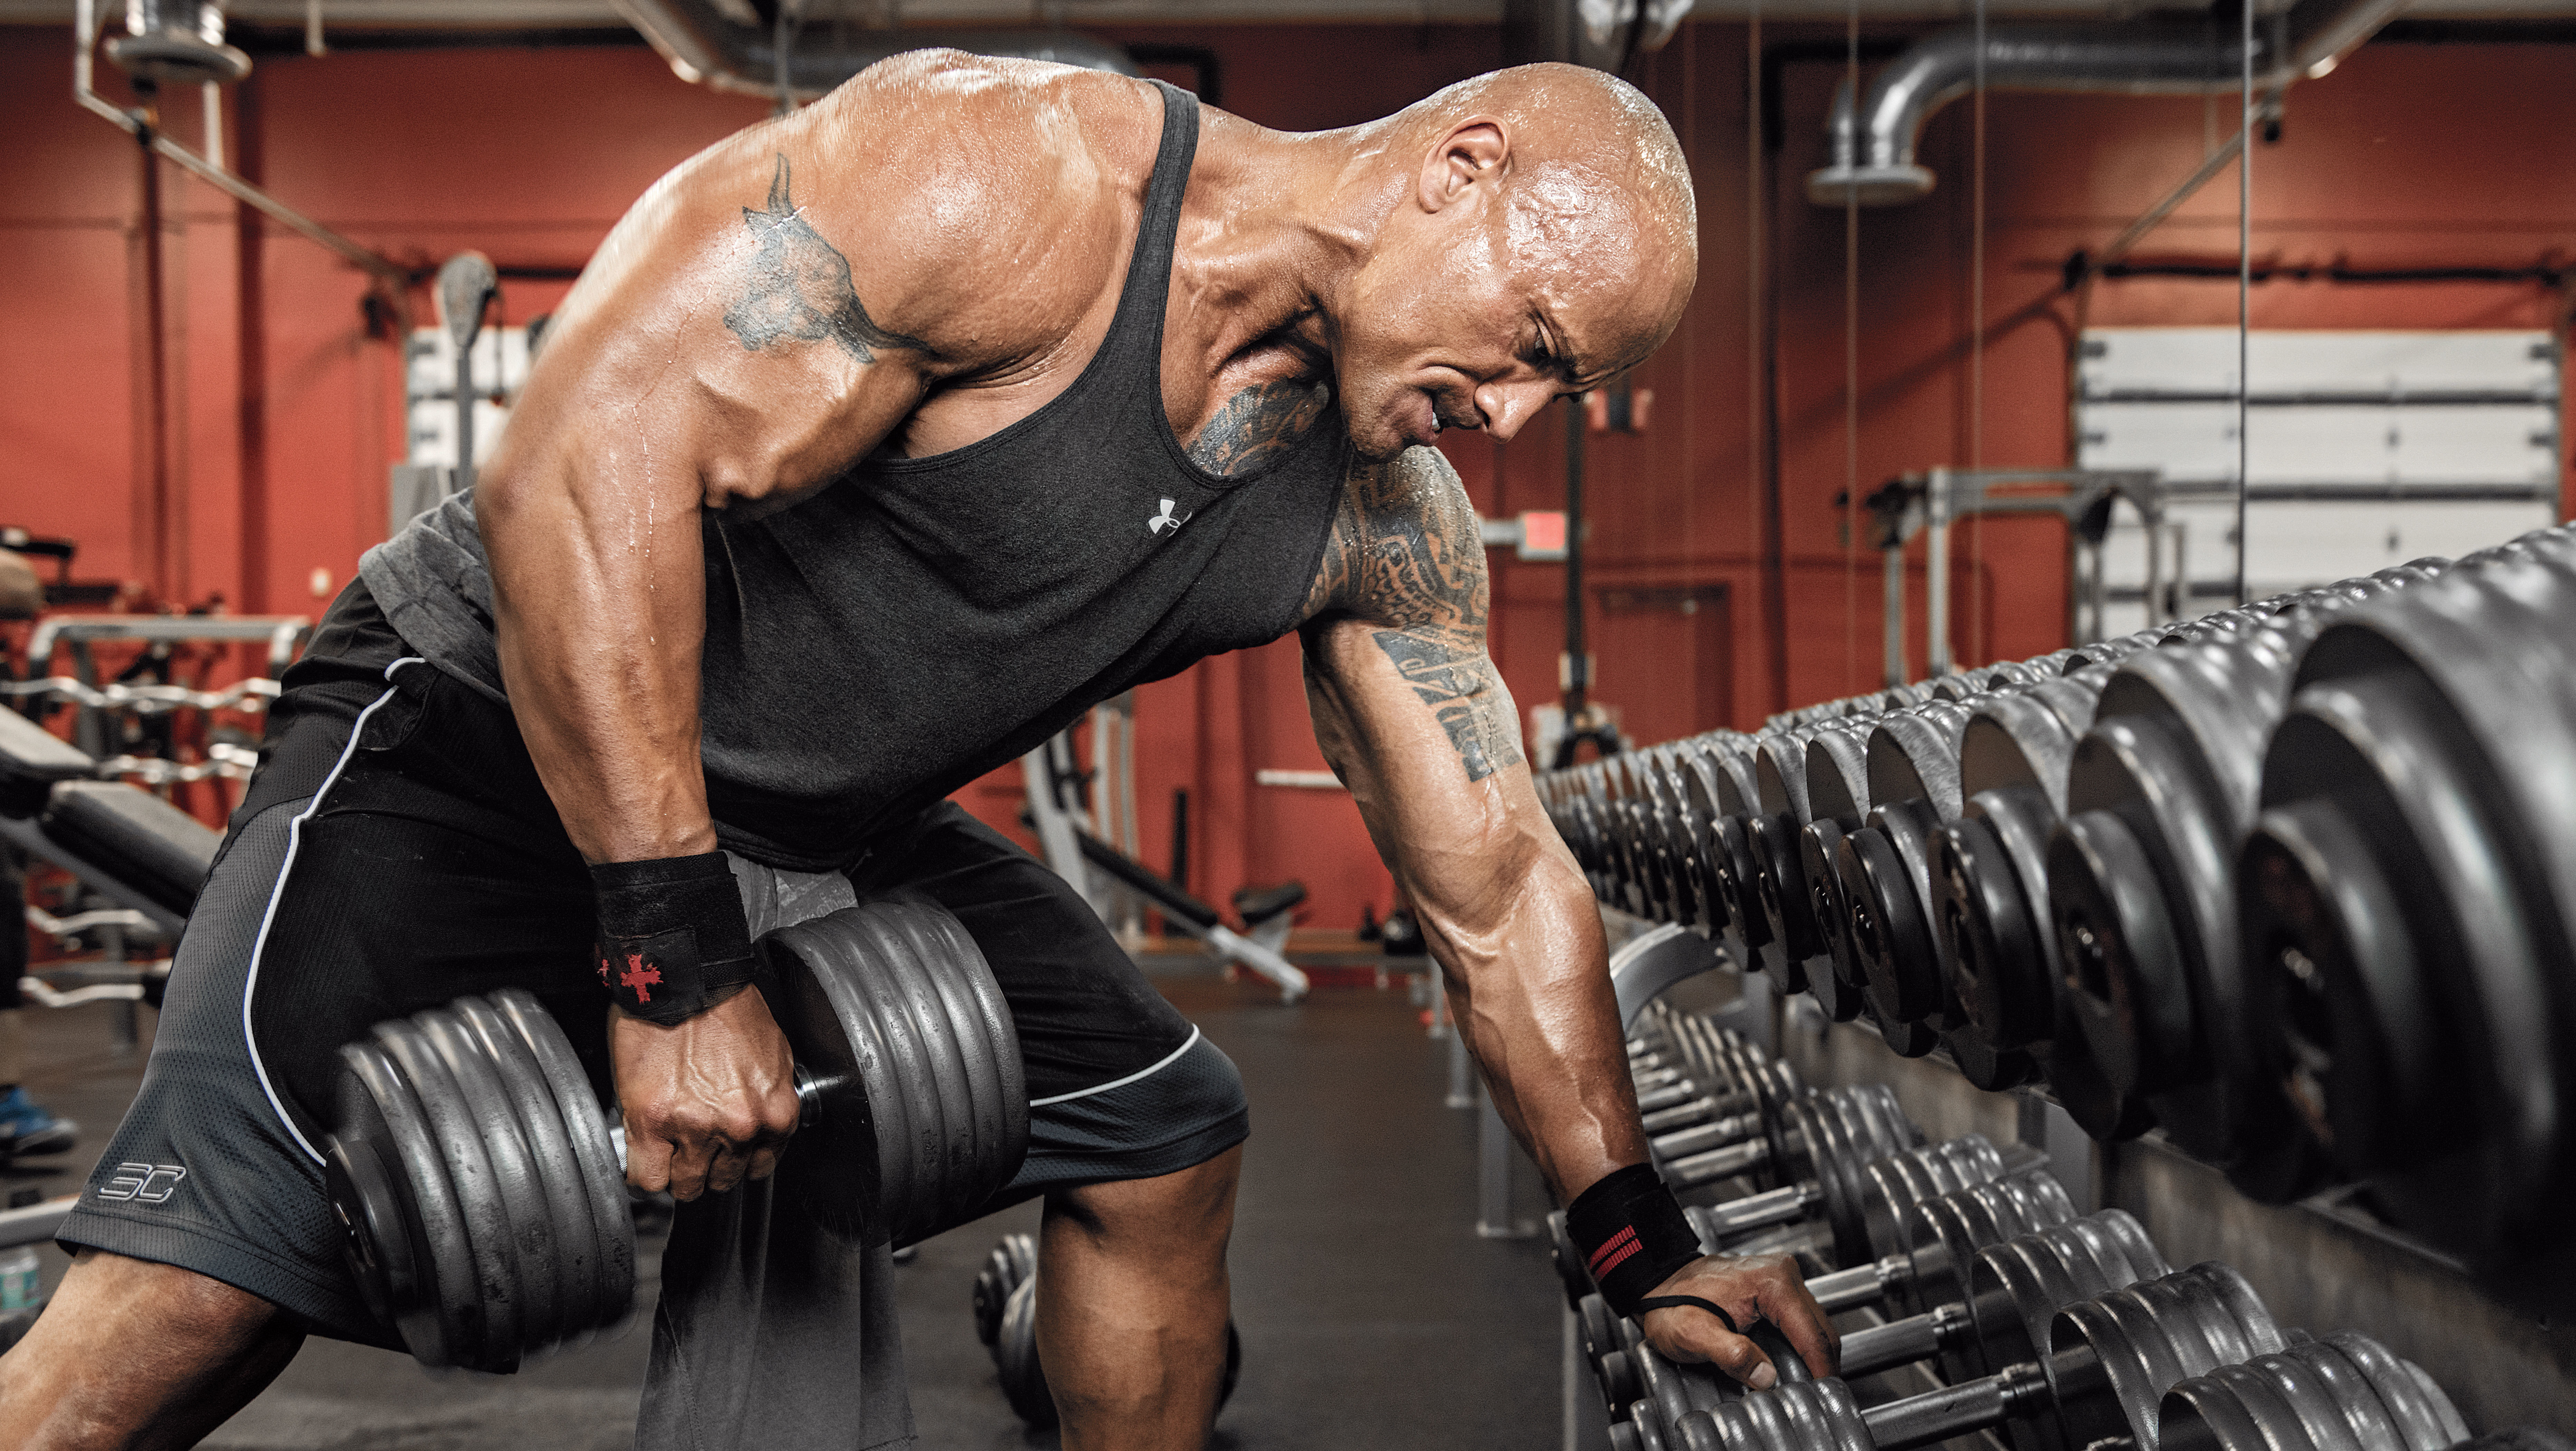 Dwayne Johnsons workout - The Rock showed his 